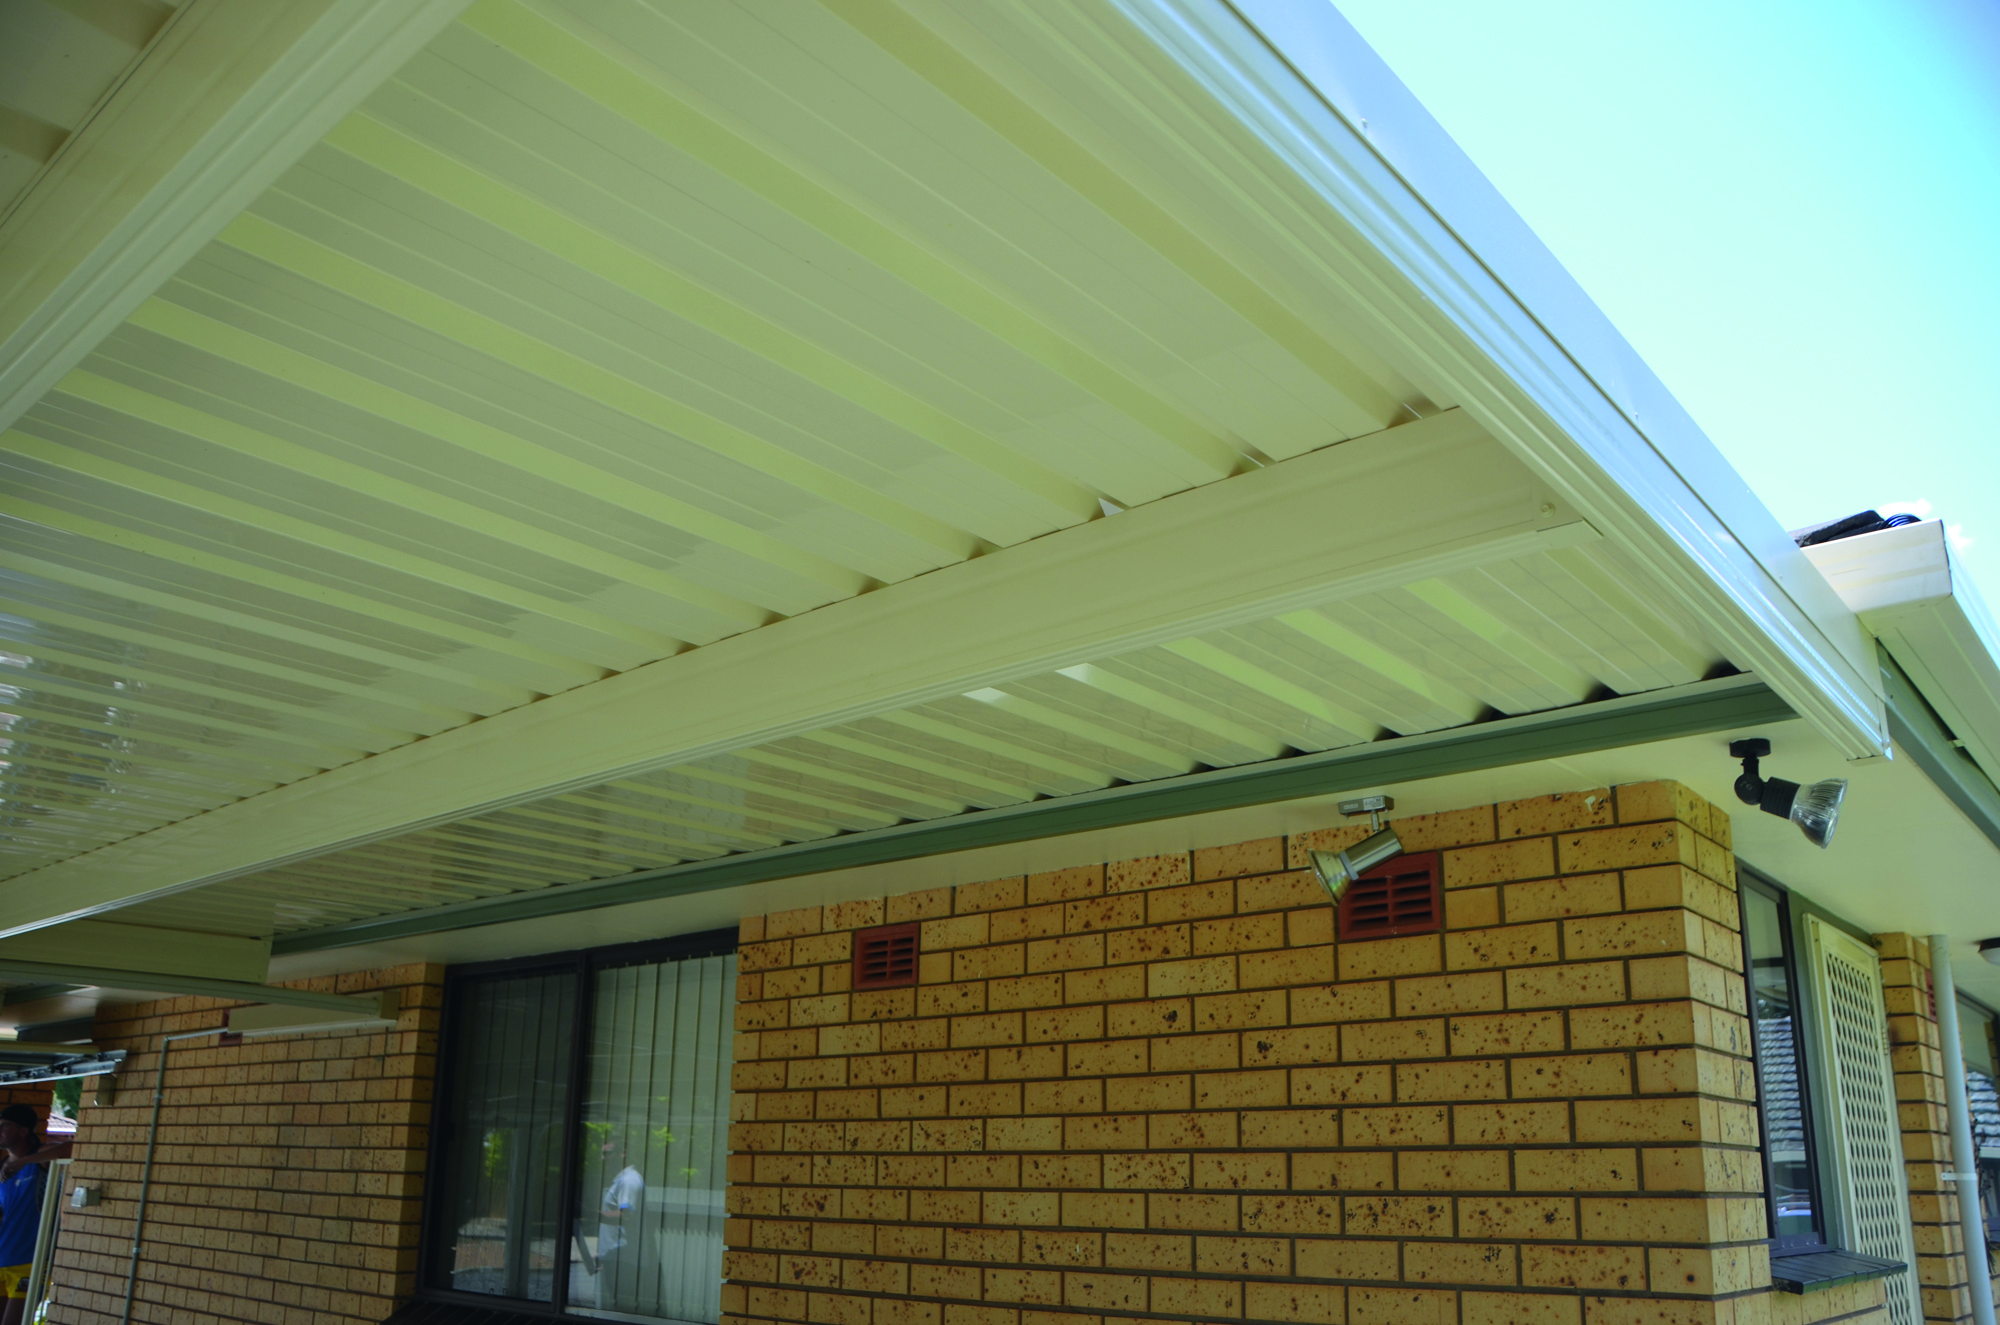 Underside of a patio roof showing backing channel